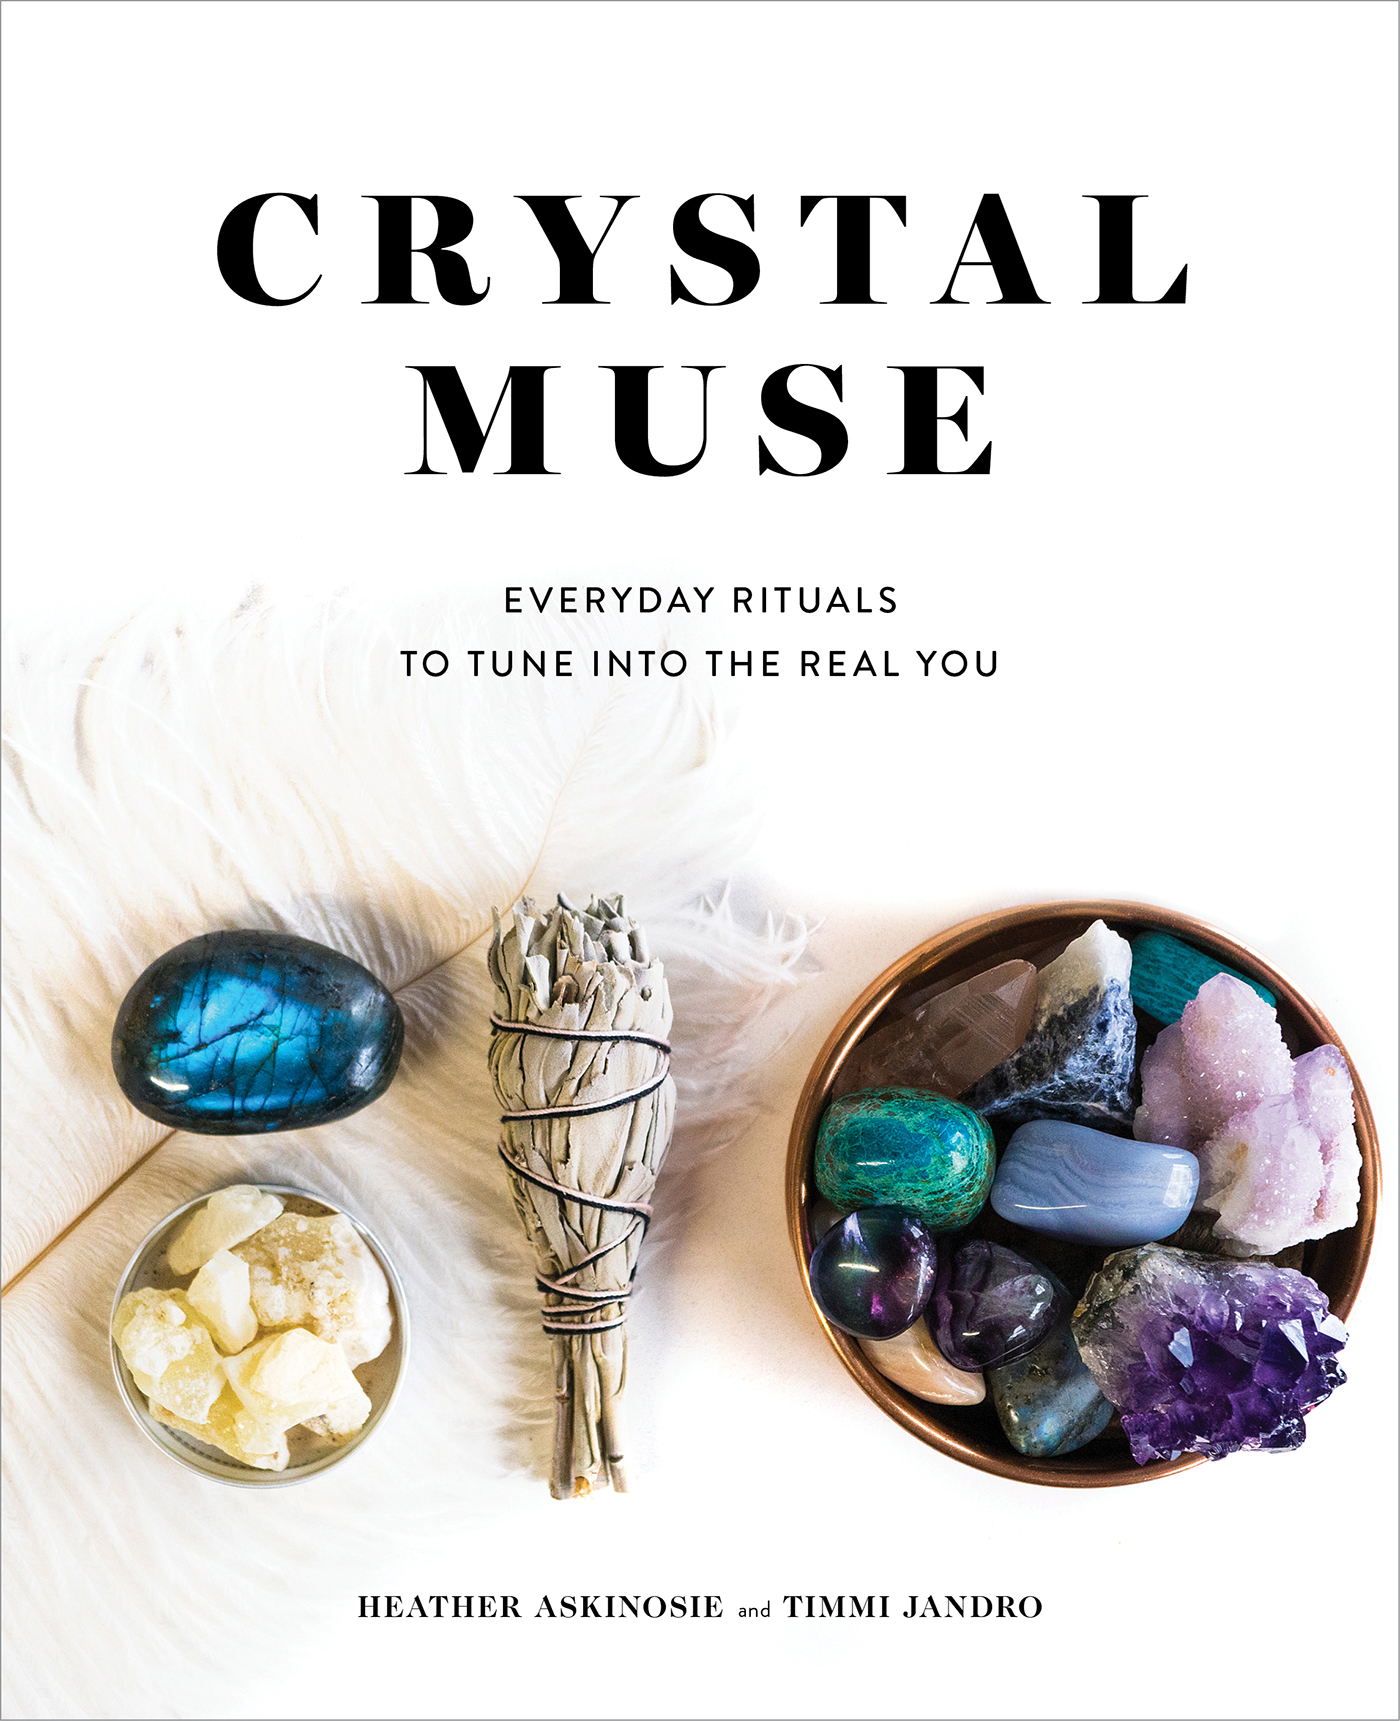 crystal Heather Askinosie Timmi Jandro Energy Muse therapy New Age alternative cleanse ritual